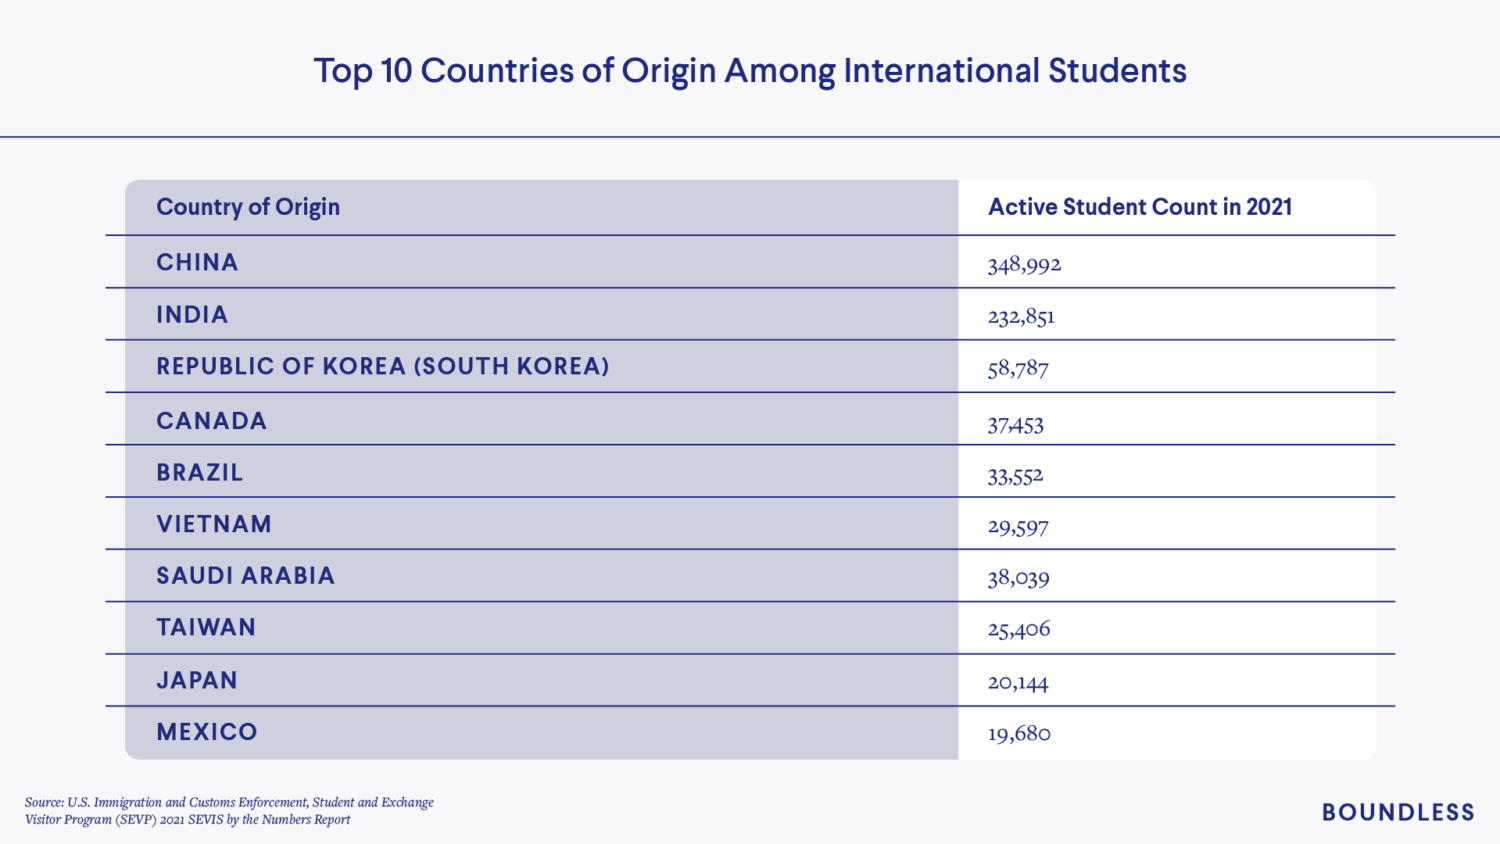 Top countries of origin among international students 